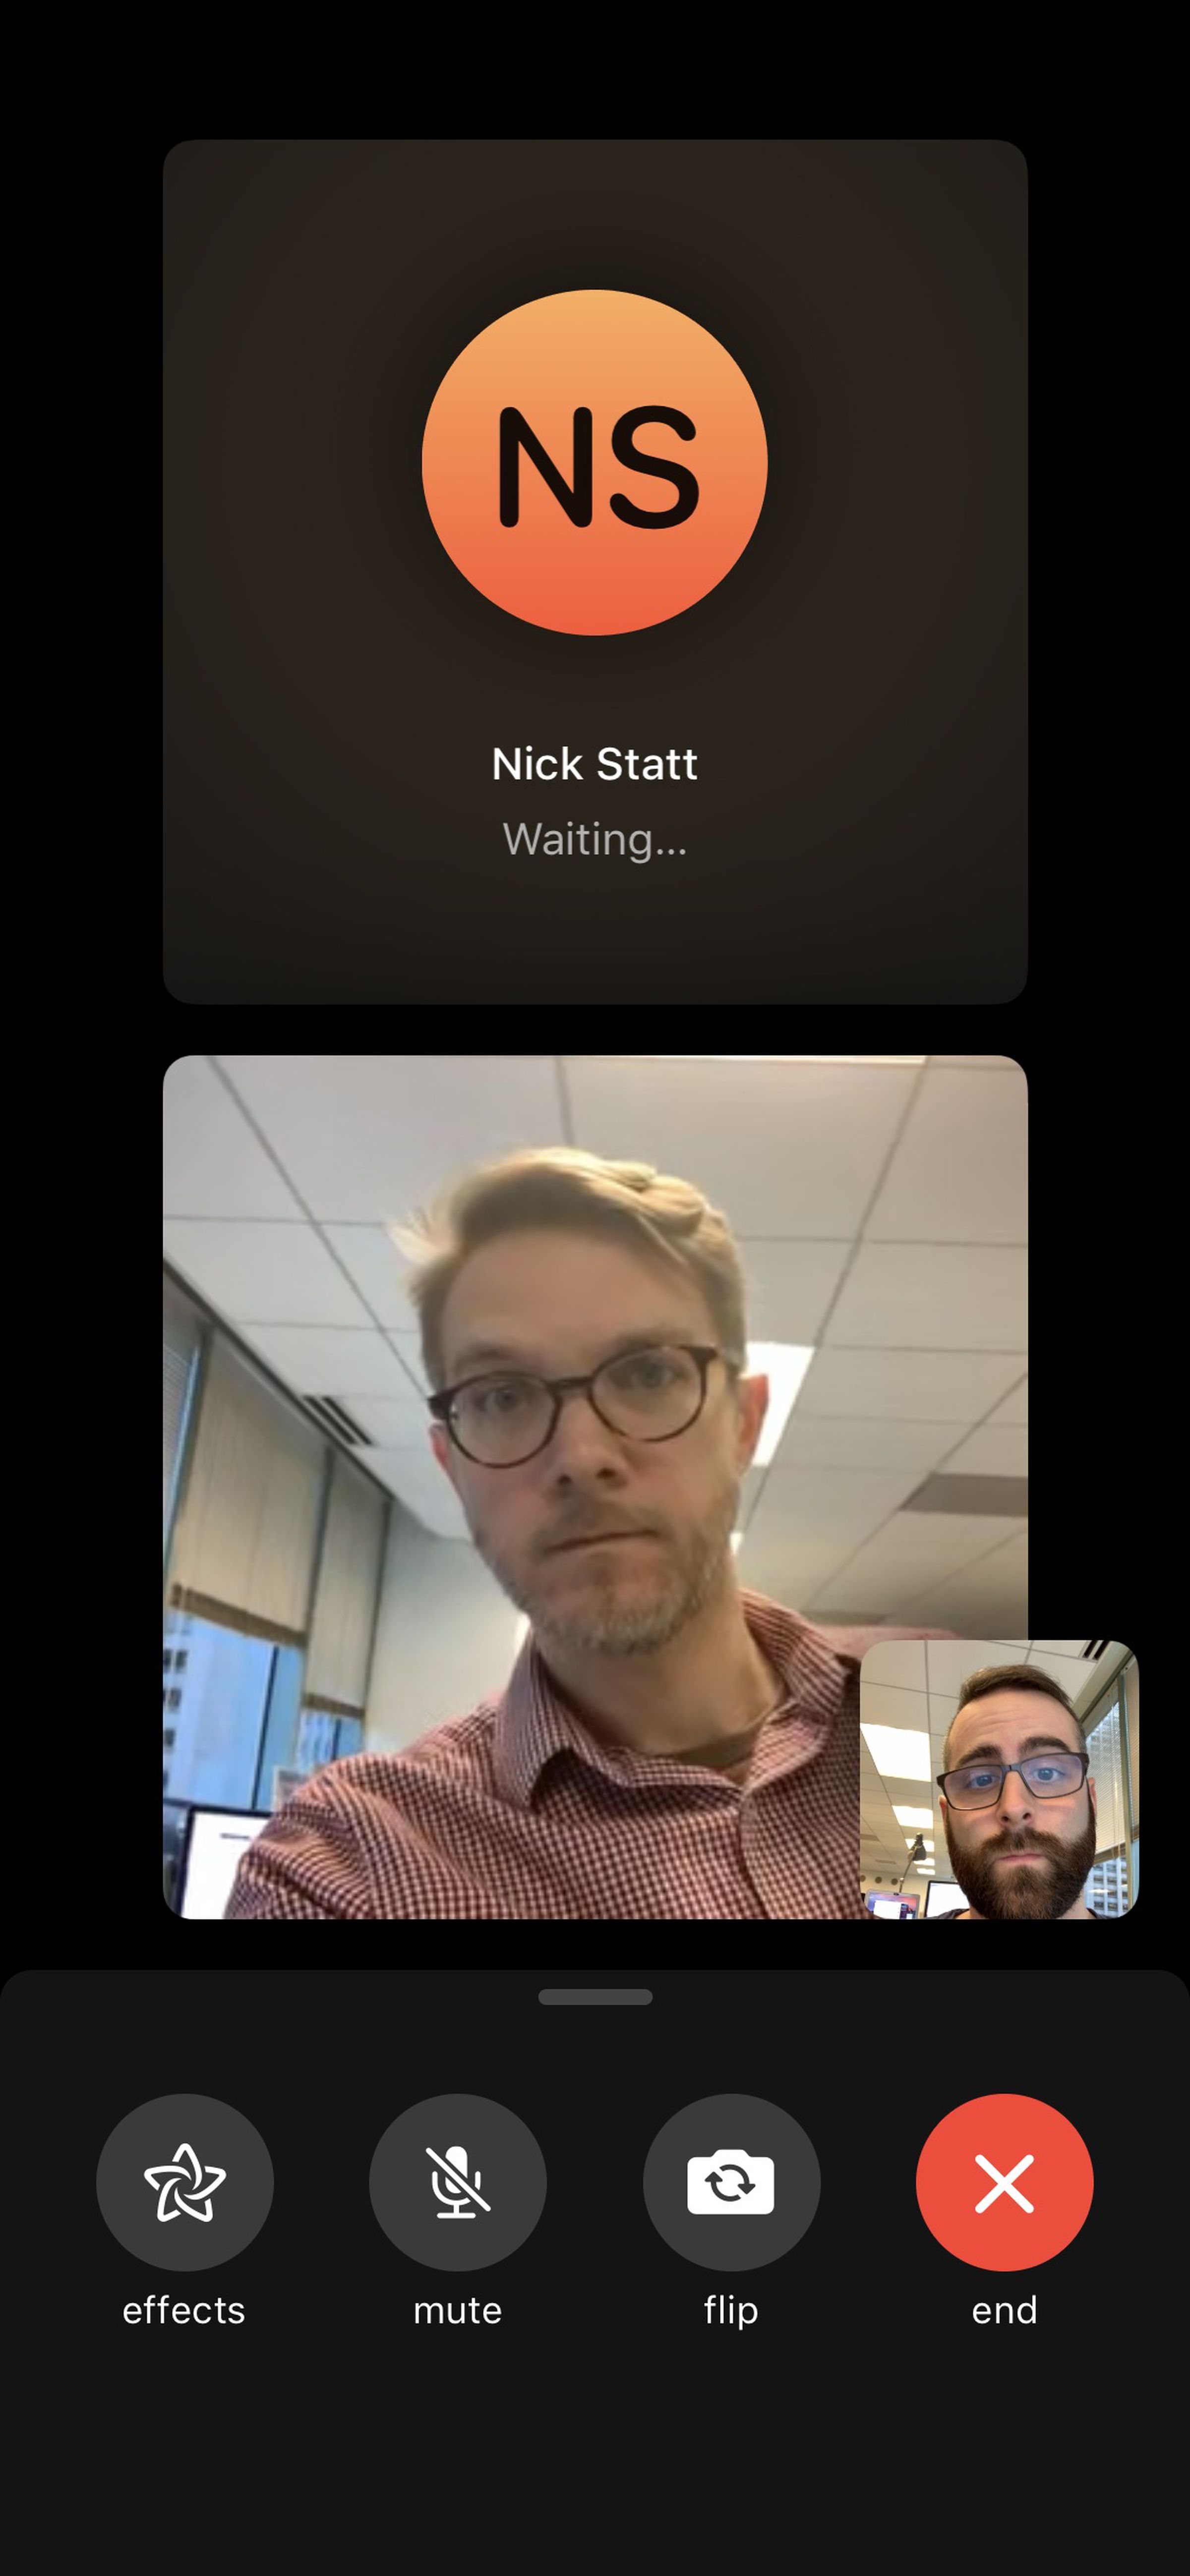 This video was sent as soon as I hit the power button to dismiss — but not answer — an incoming FaceTime Video call